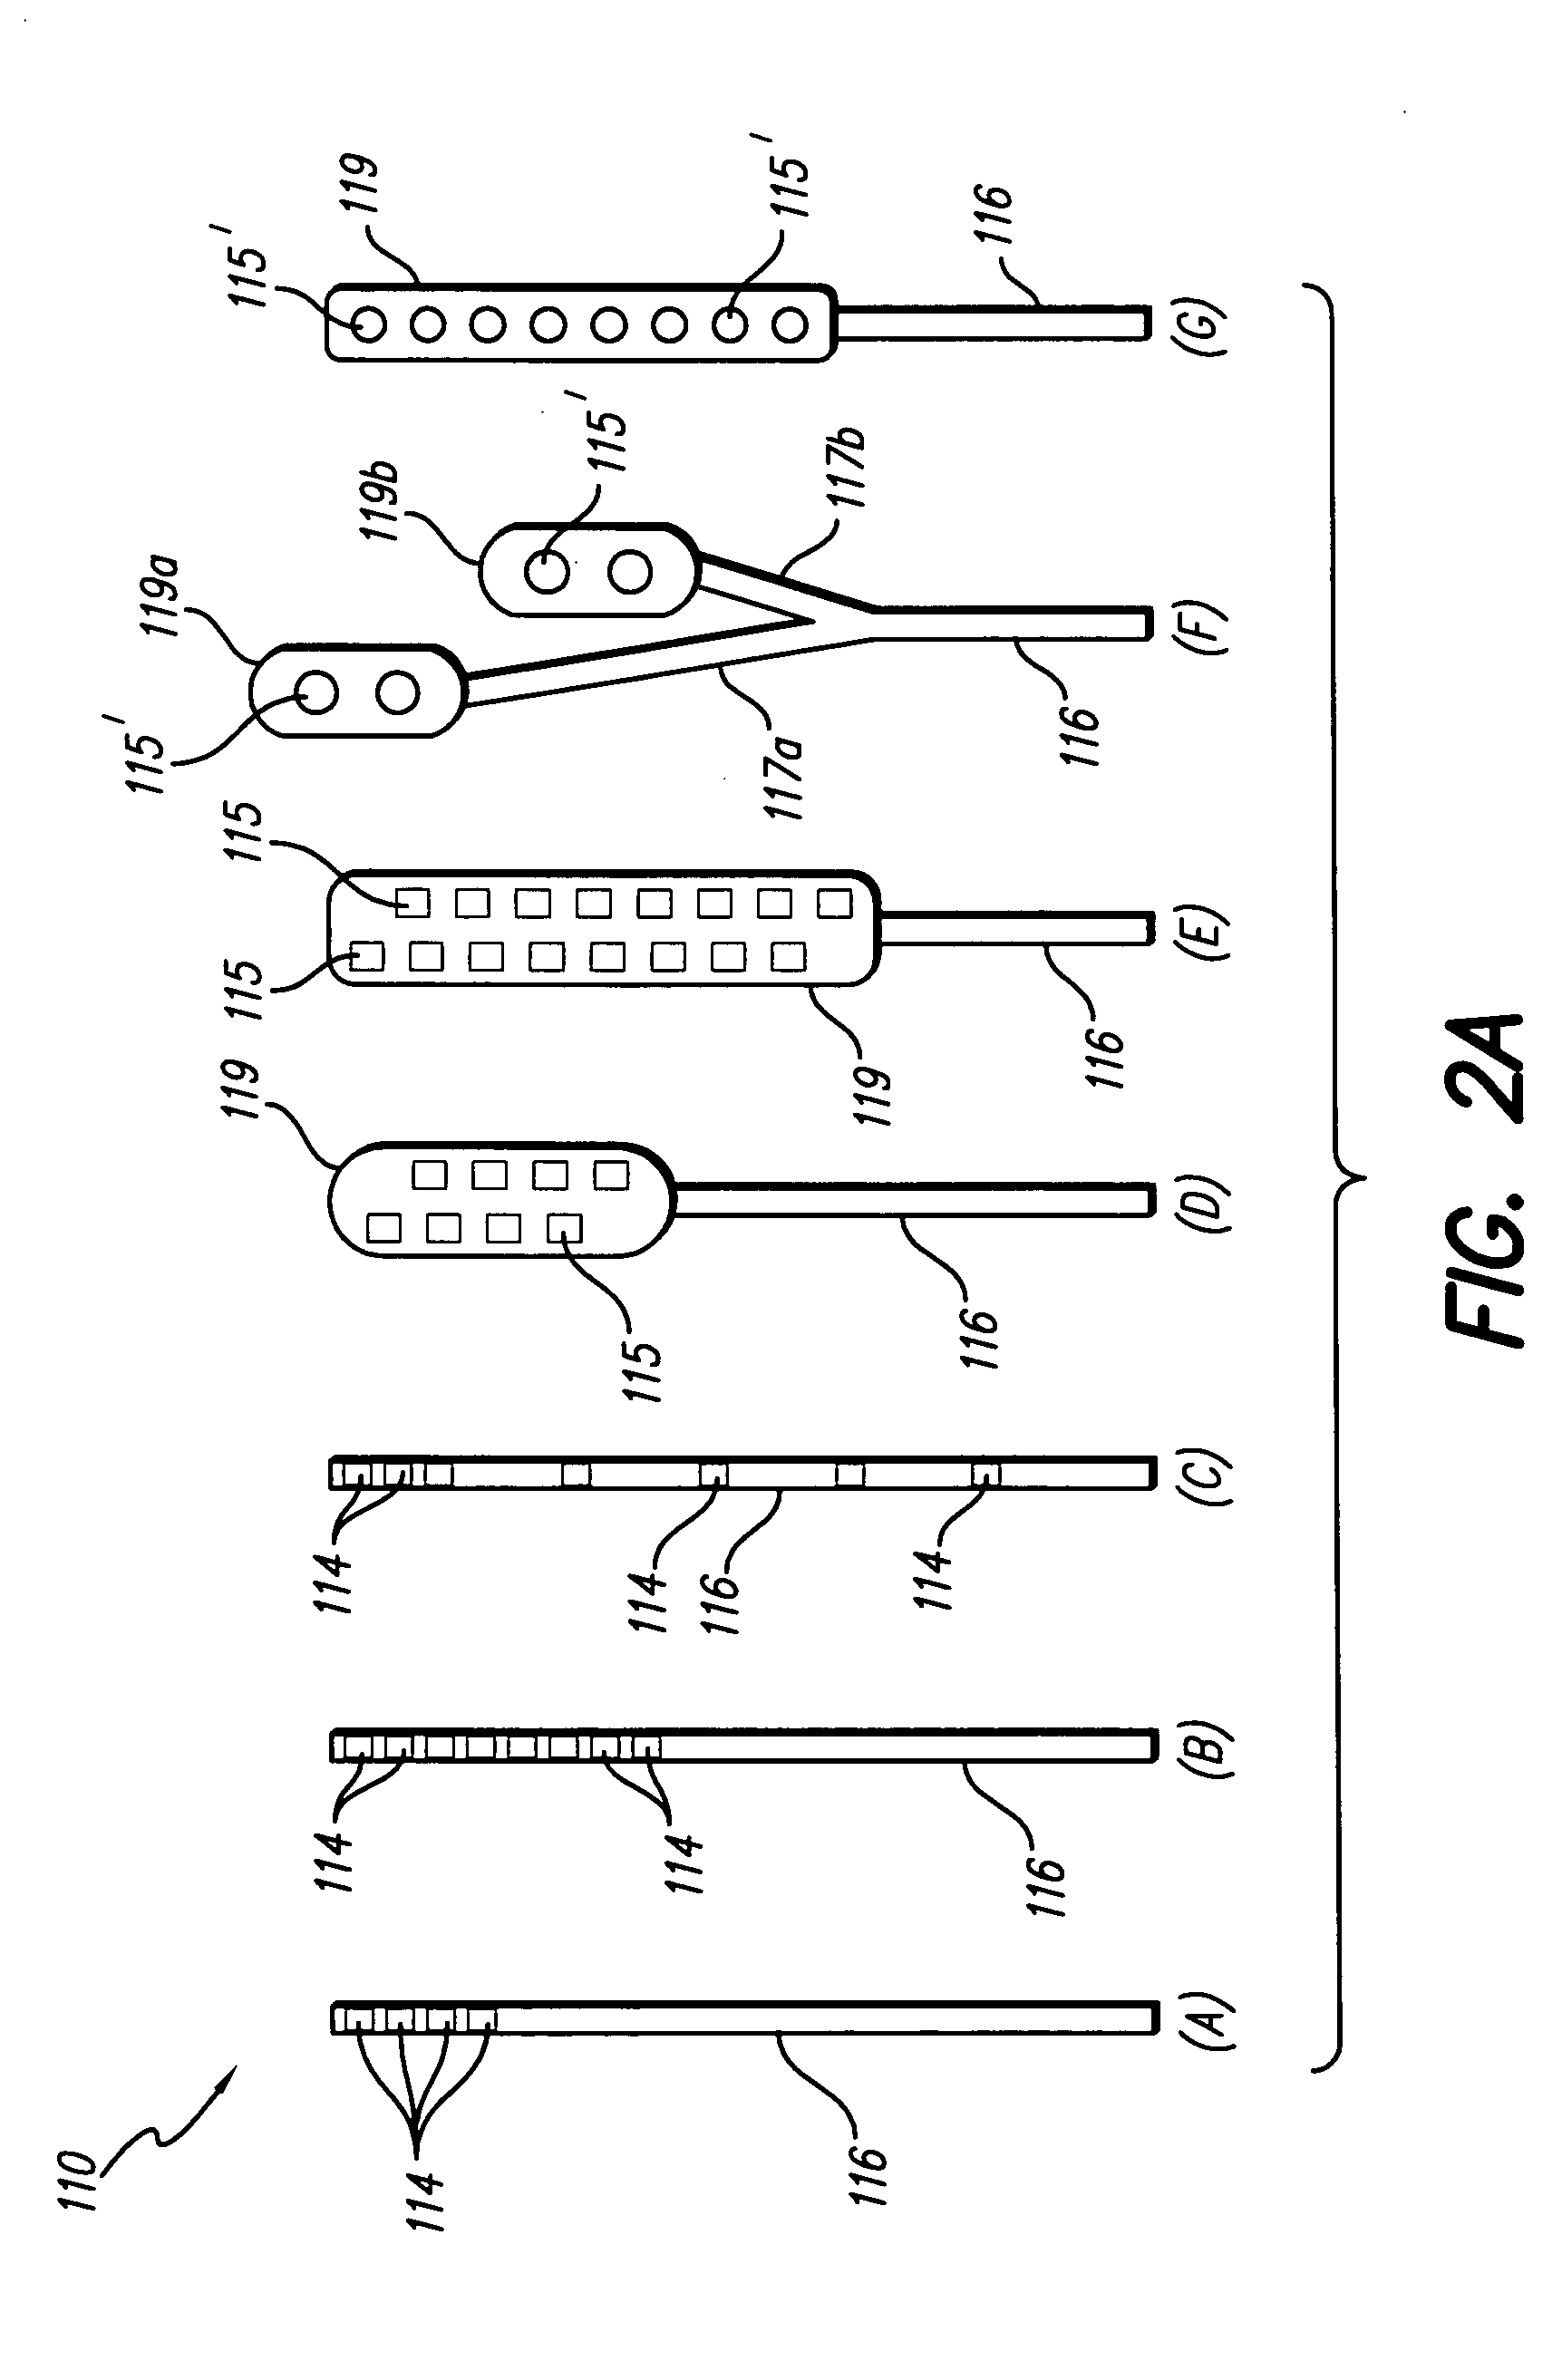 Rechargeable spinal cord stimulator system